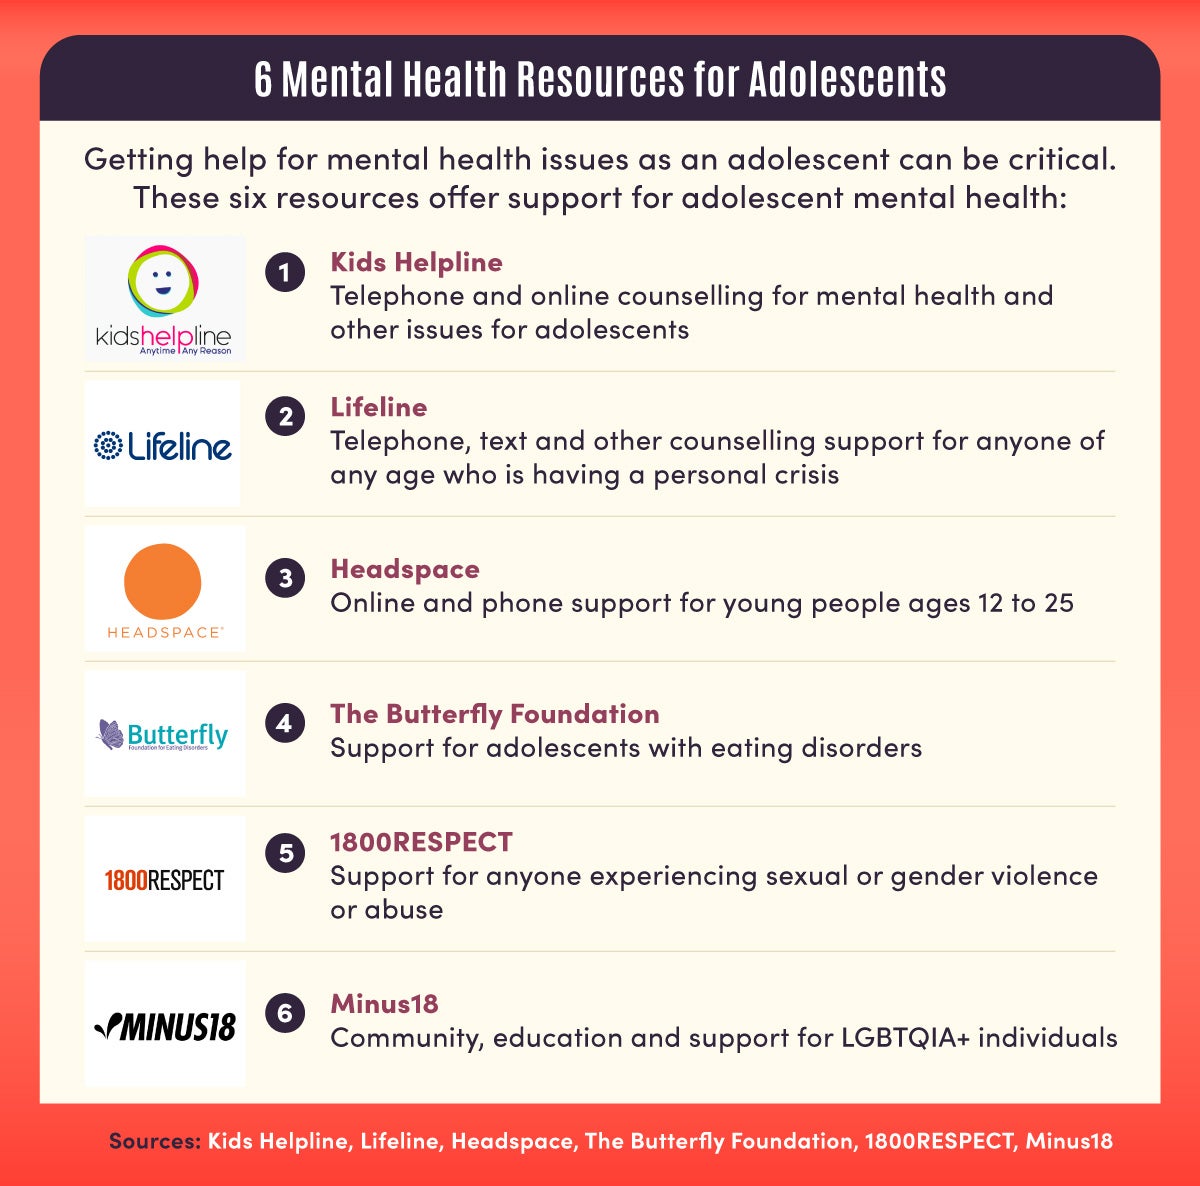 A list of six organisations that provide mental health resources for adolescents.